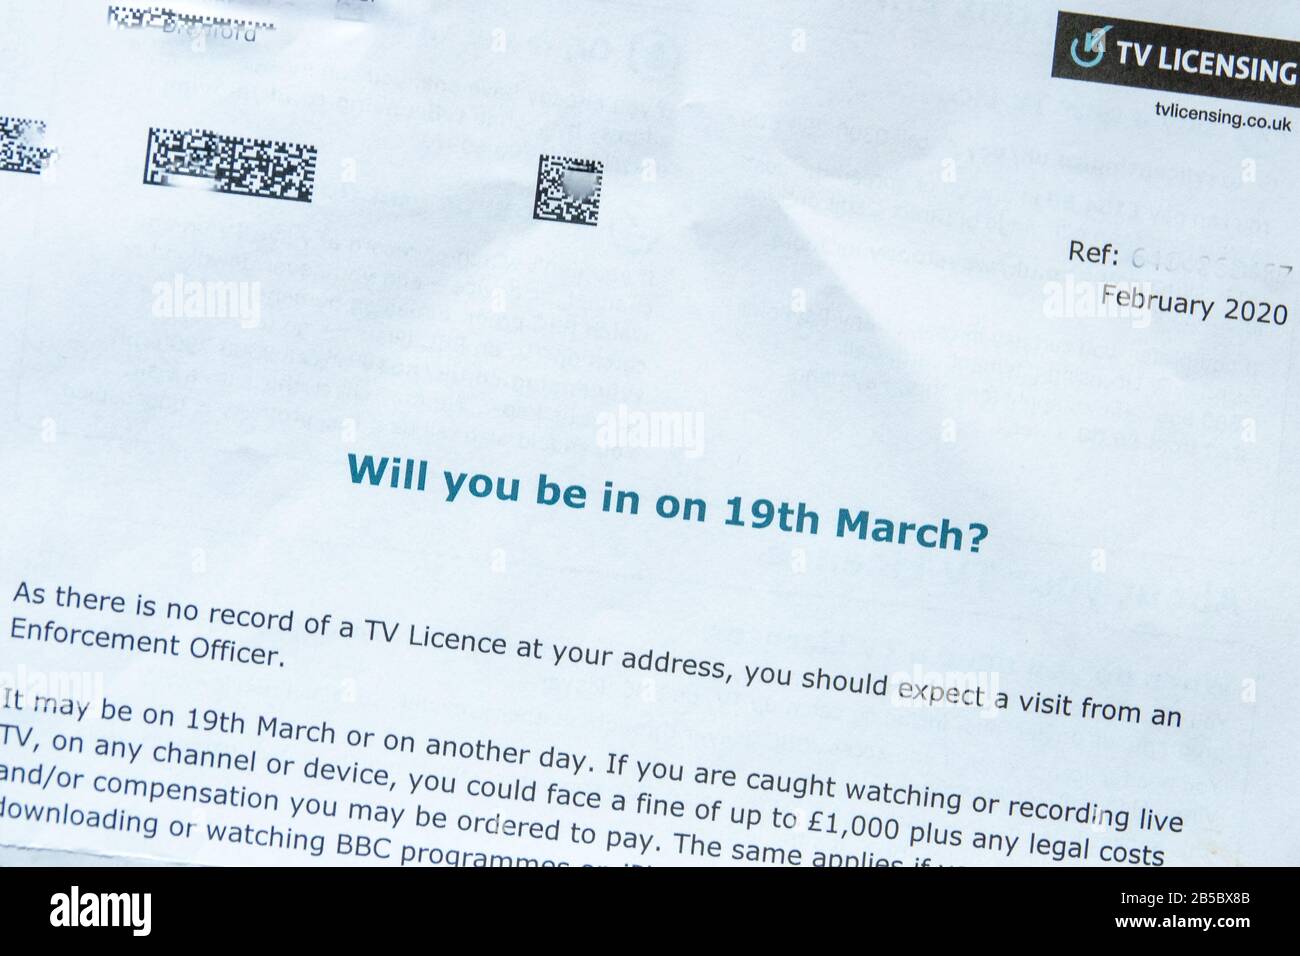 UK TV licence reminder or threatening letter sent to the legal occupier of a house to warn of the imminent visit to the property from enforcement officers. Stock Photo